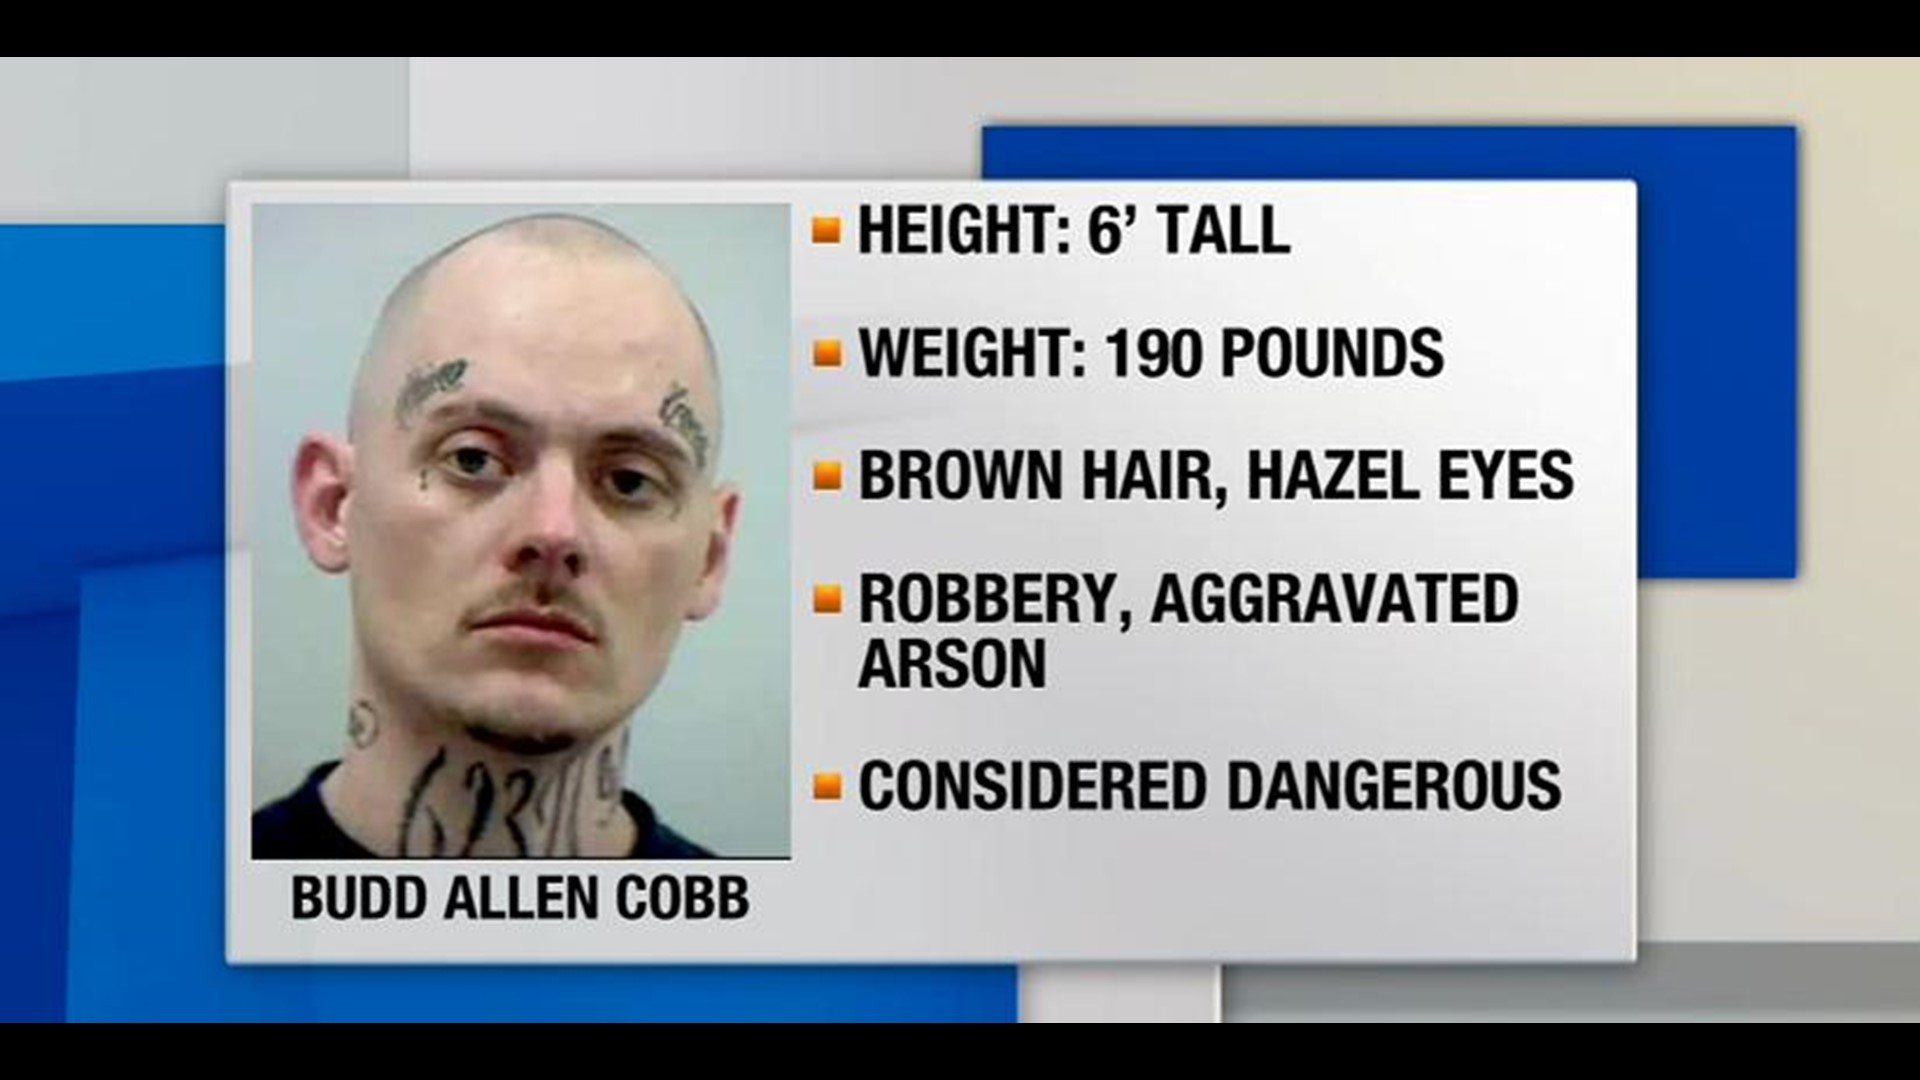 Guernsey County Jail Escapee Arrested